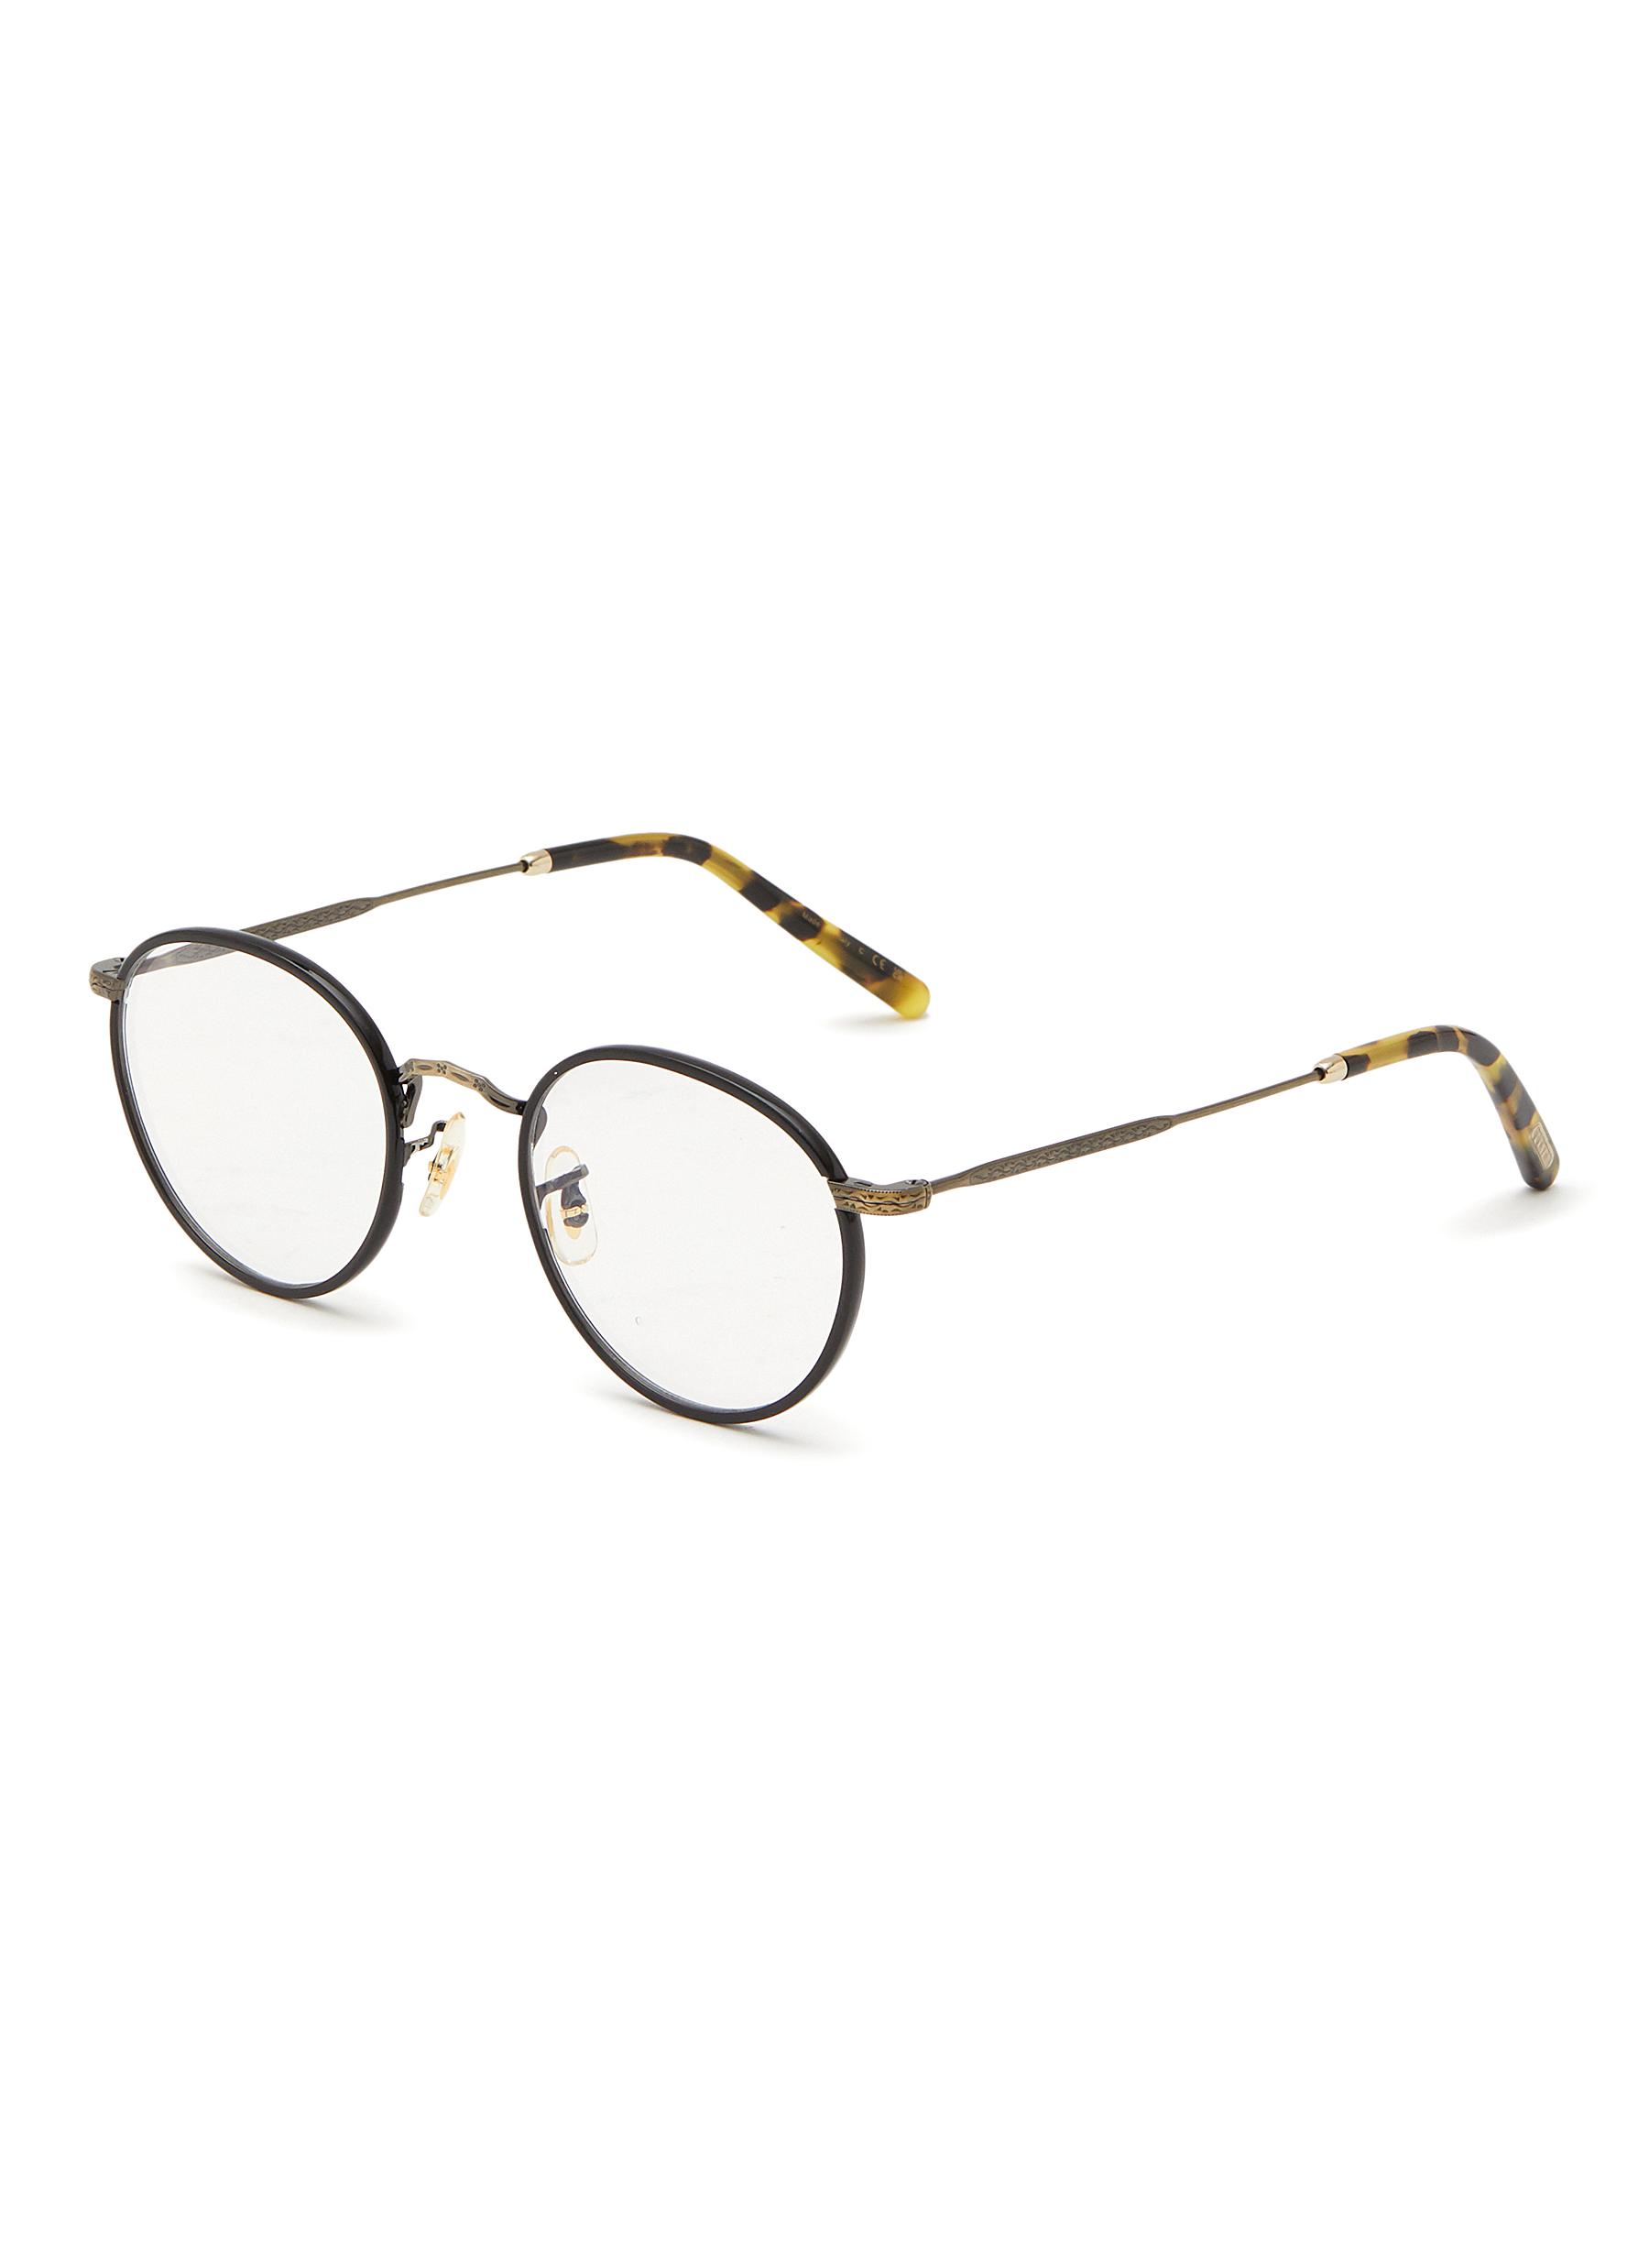 OLIVER PEOPLES ACCESSORIES ‘CARLING' ROUND ACETATE METAL FRAME OPTICAL GLASSES